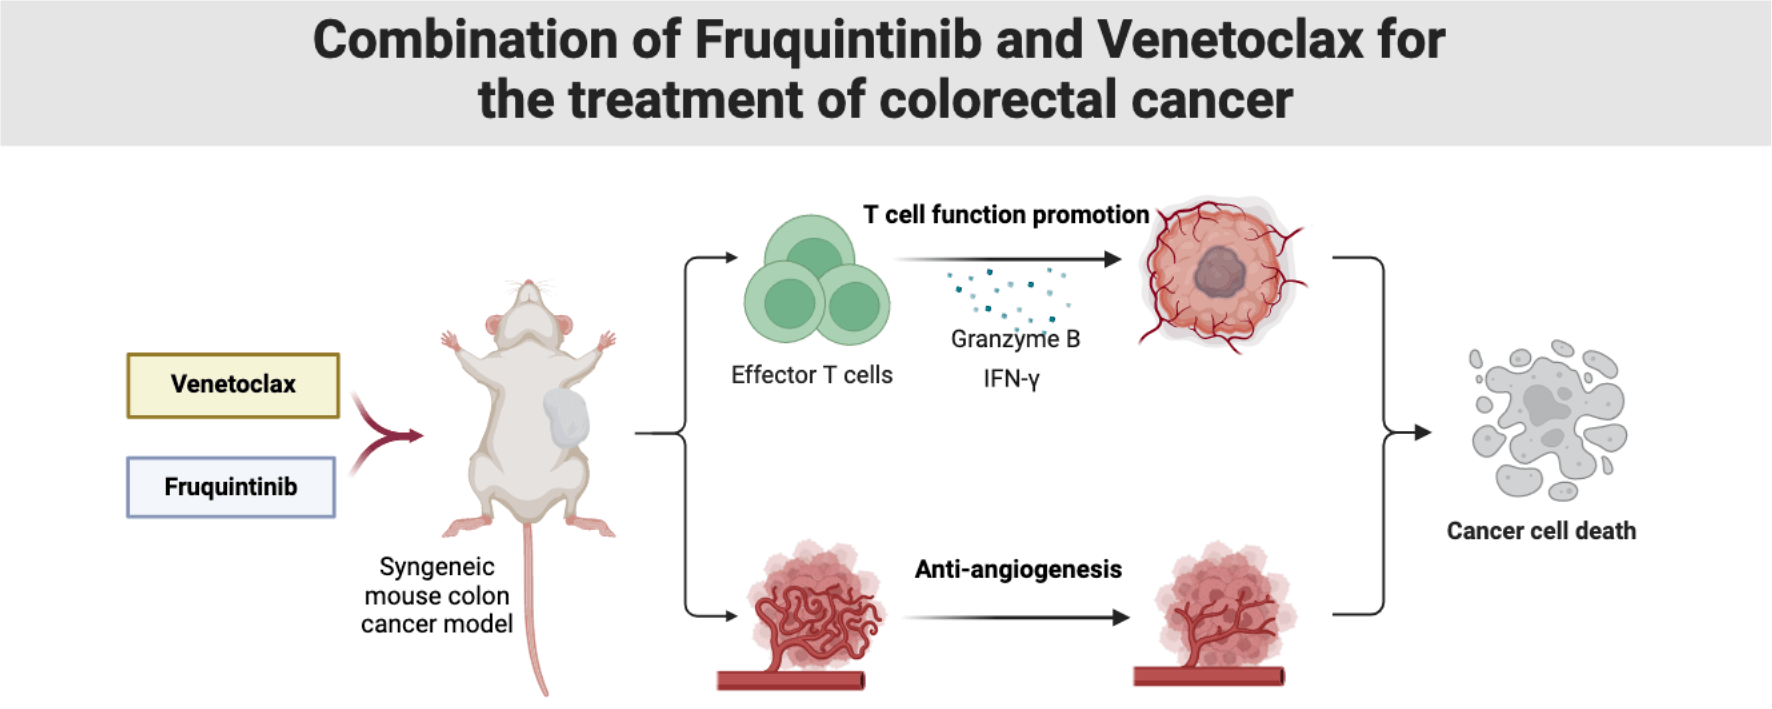 Combination of fruquintinib with venetoclax for the treatment of colorectal cancer